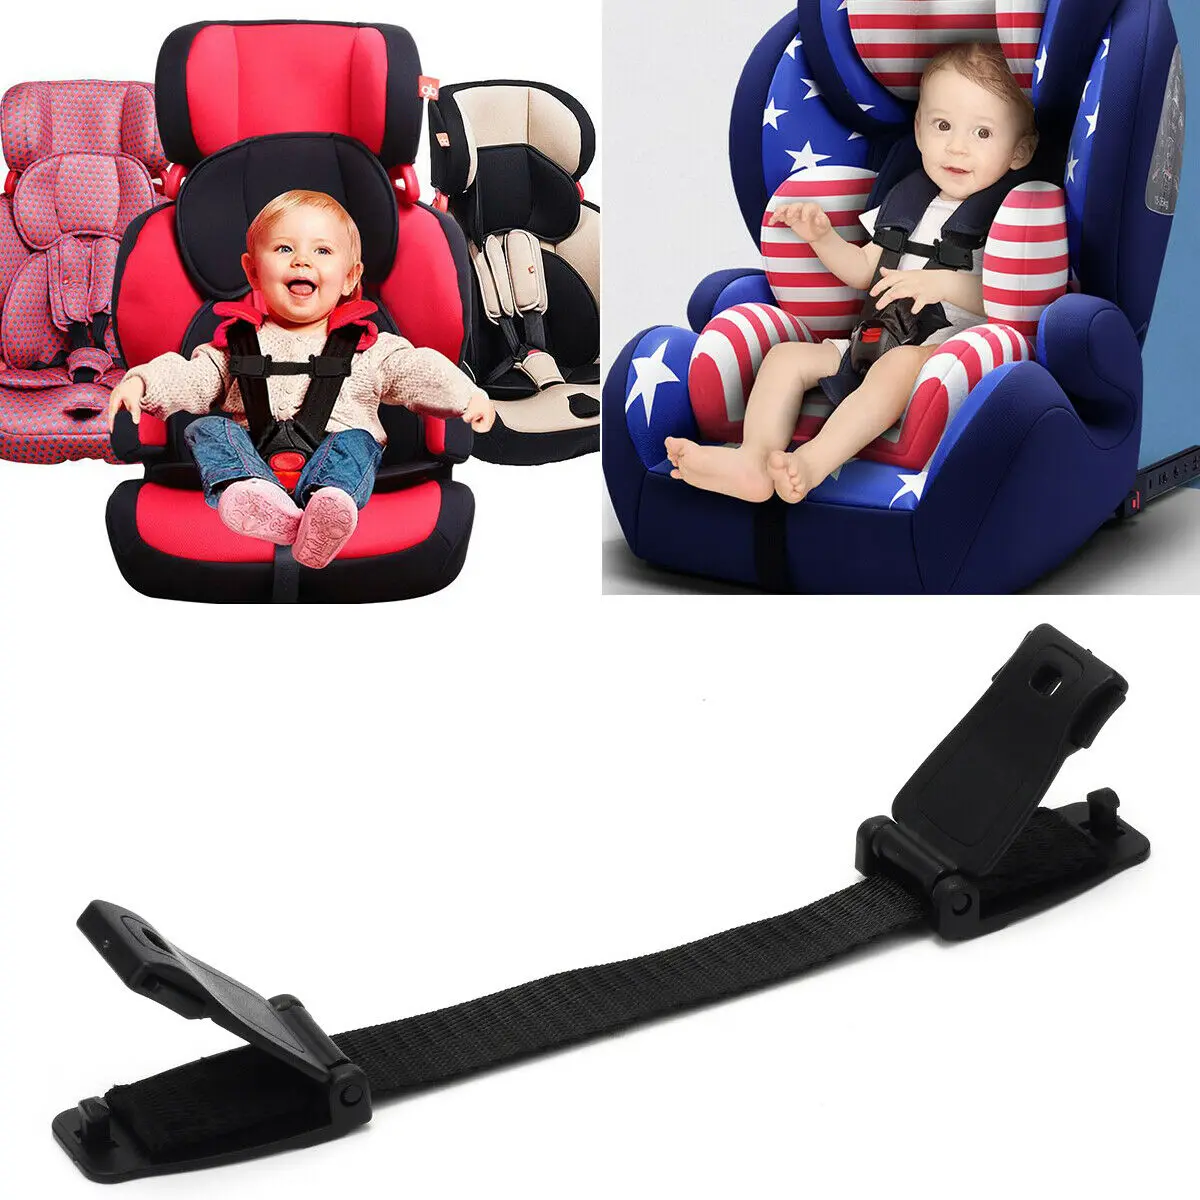 Car Seat Buggy Highchair Safety Harness Strap Lock Anti Escape Child Chest Clip 